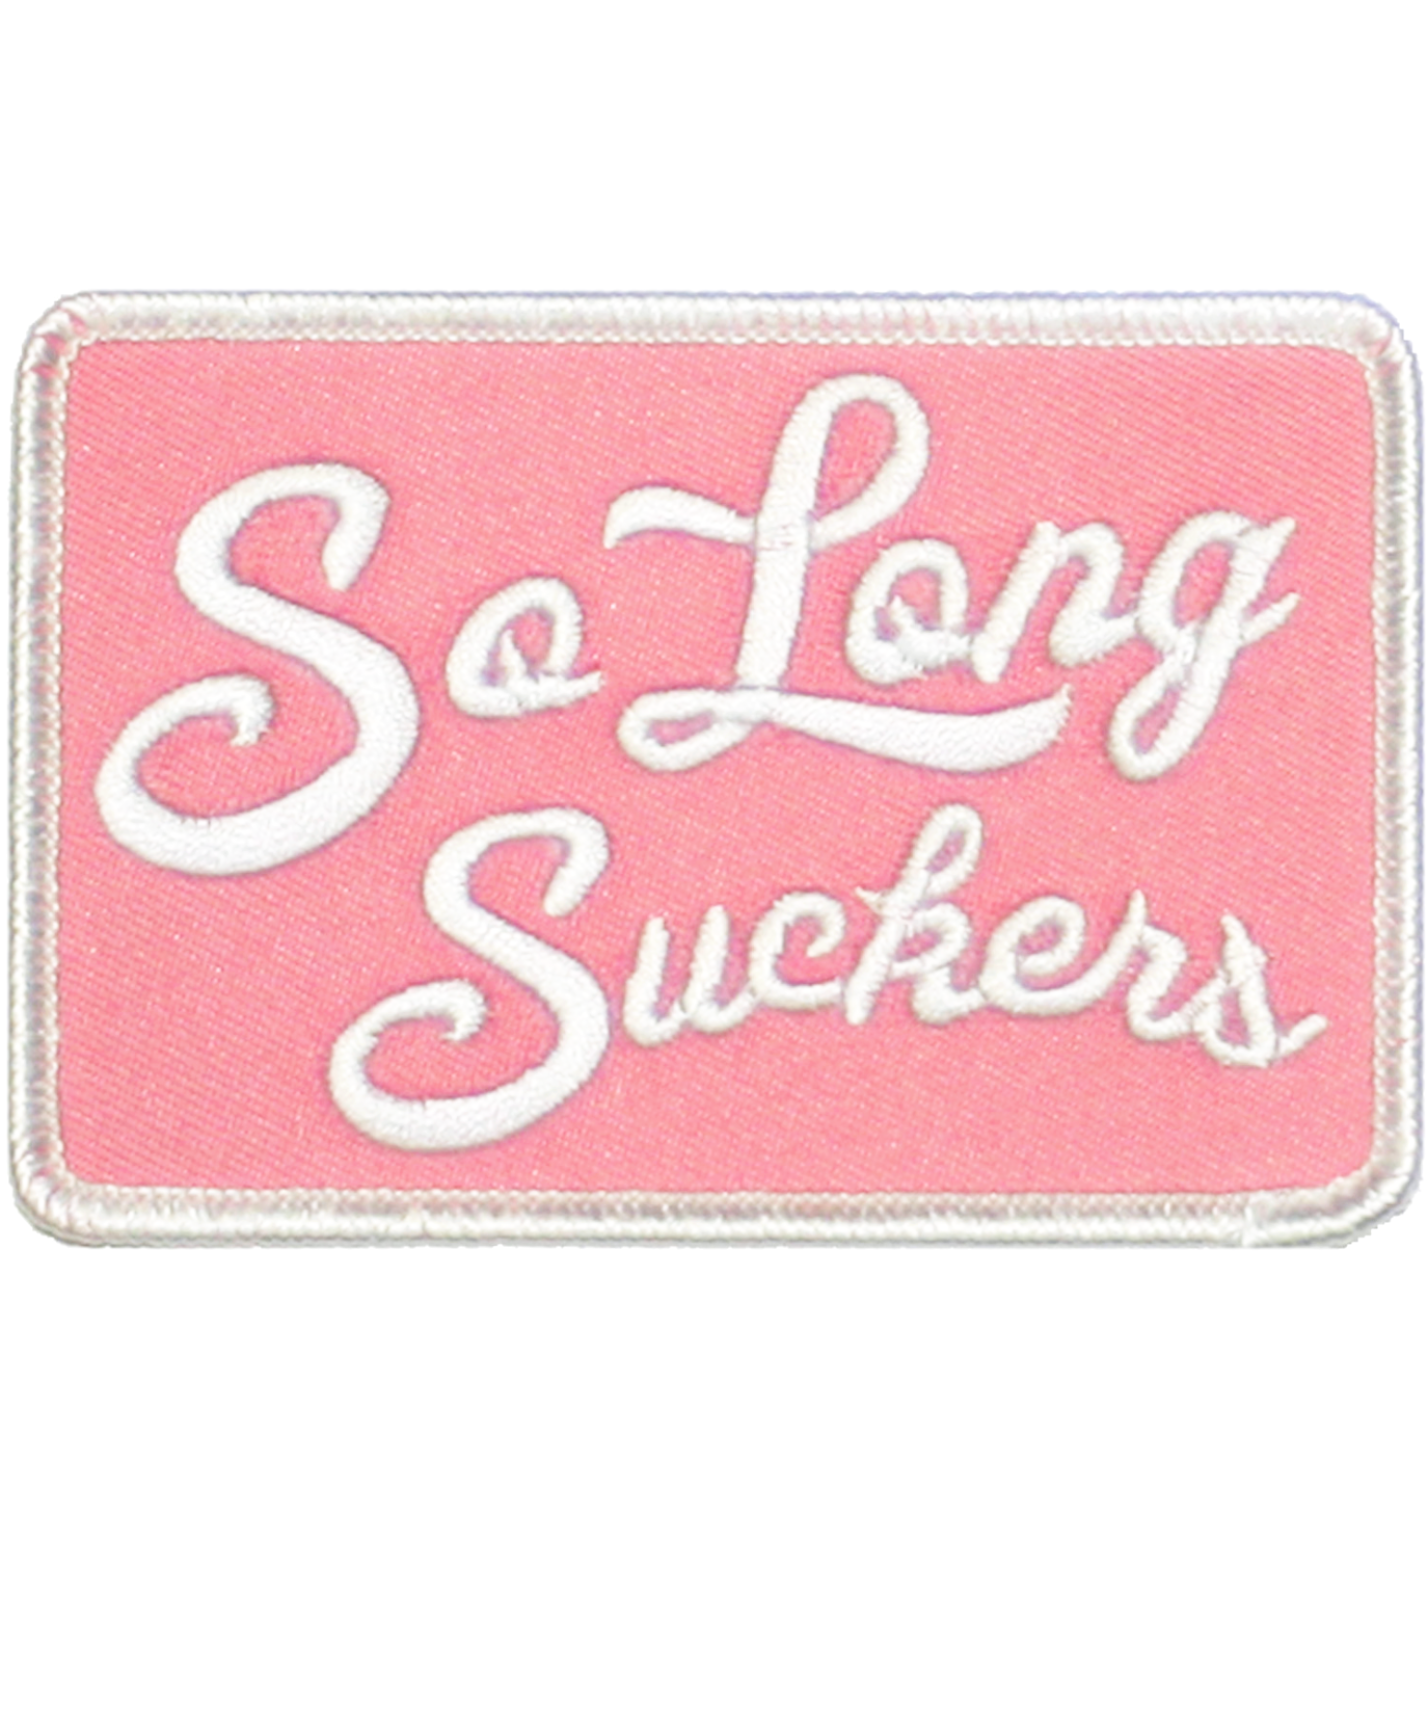 The SO LONG SUCKERS Patch - PINK/WHITE